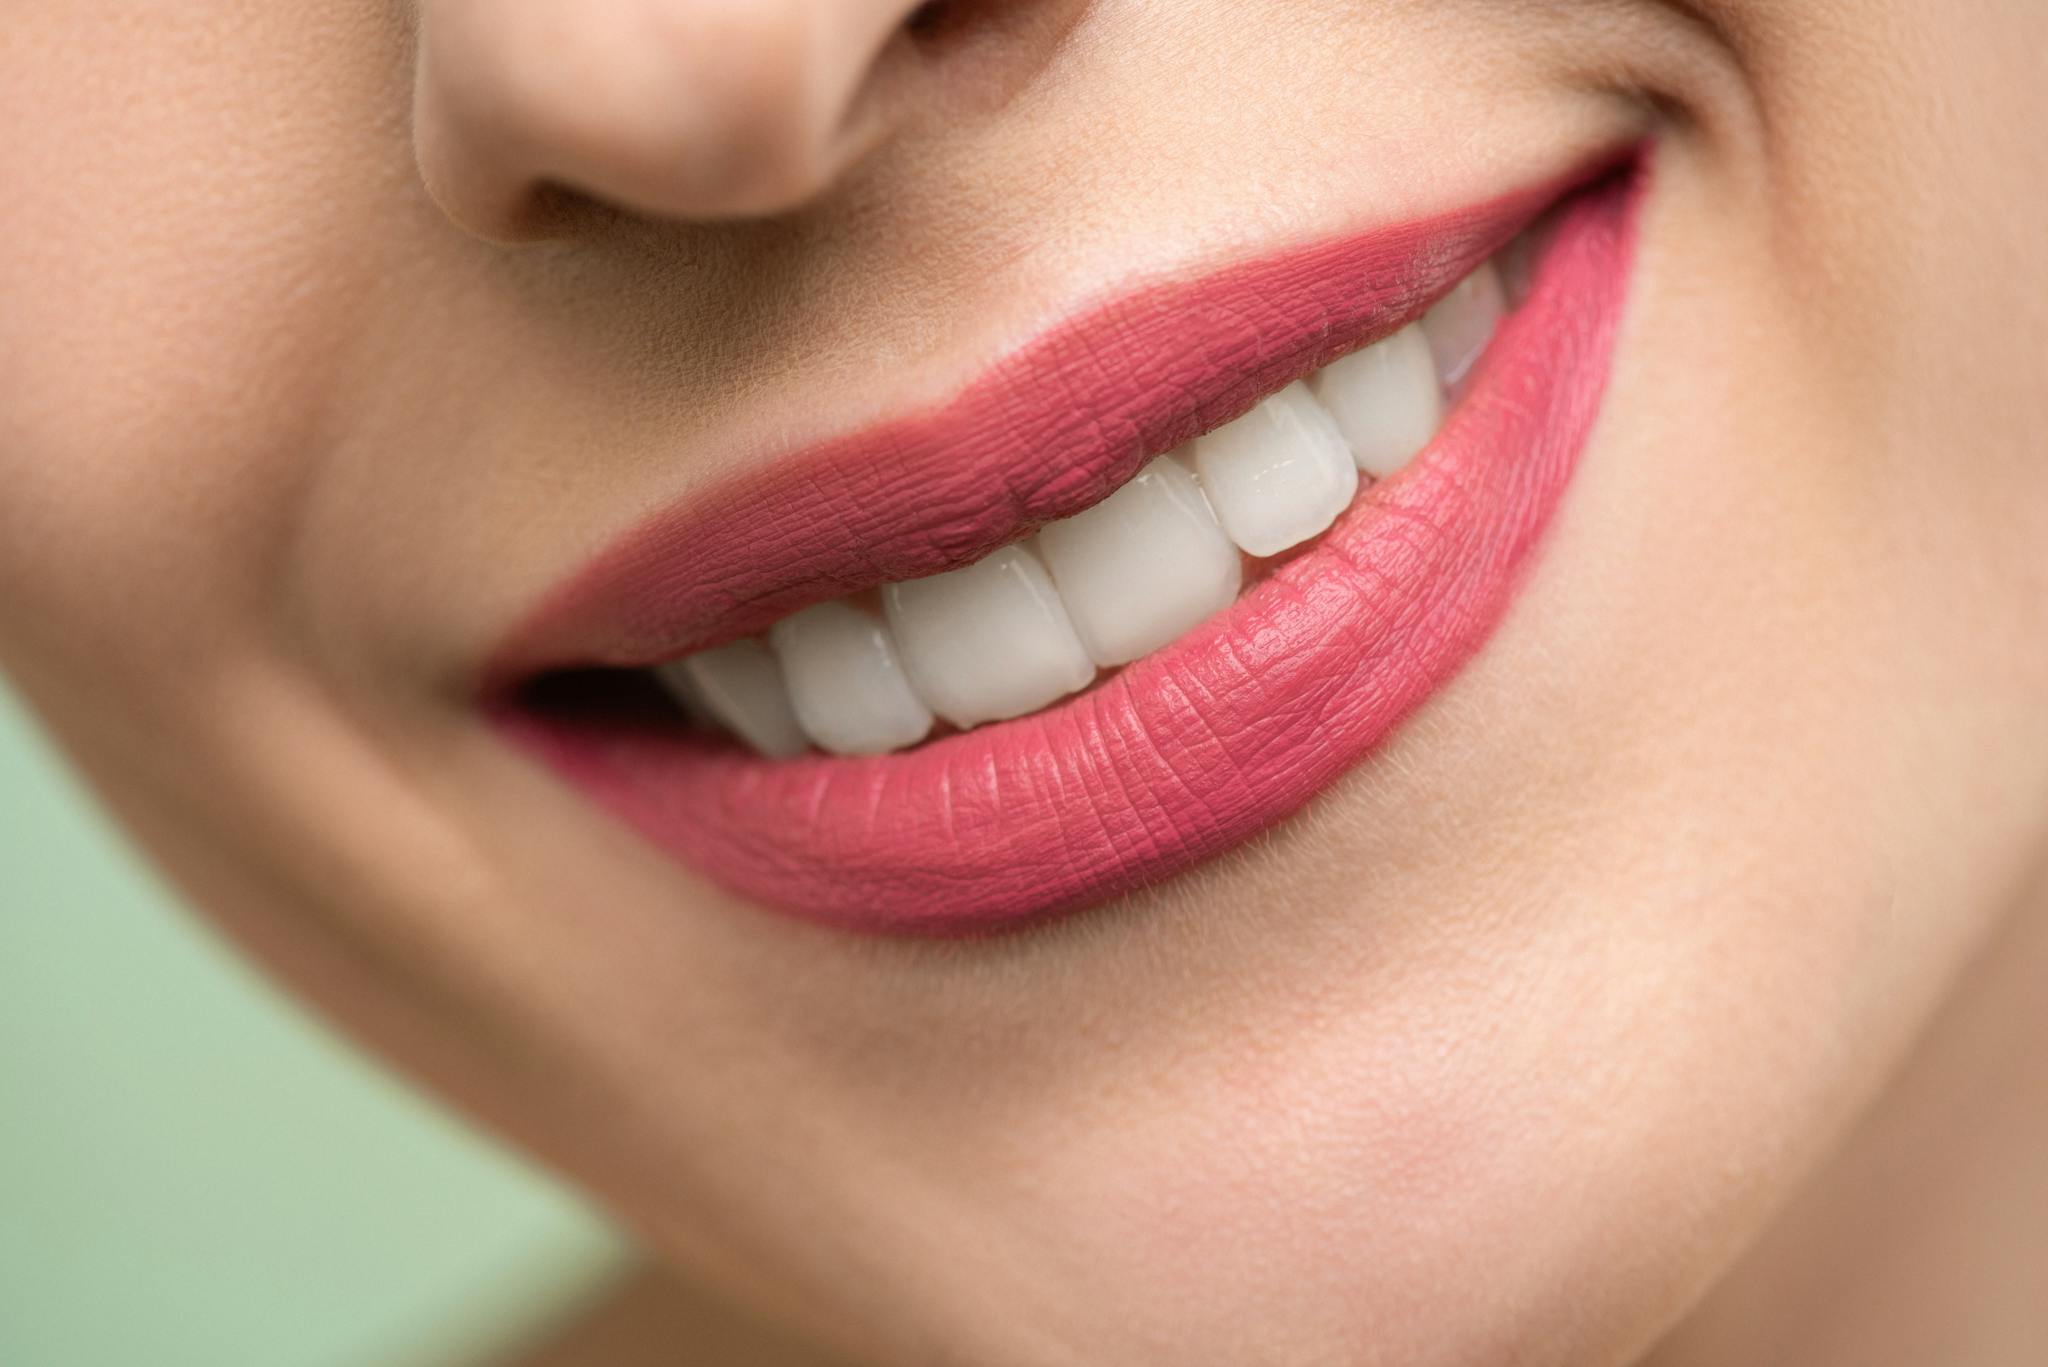 Woman With Red Lipstick Smiling. Ivy Lane Dentistry offers dental sealant services in San Antonio, TX.